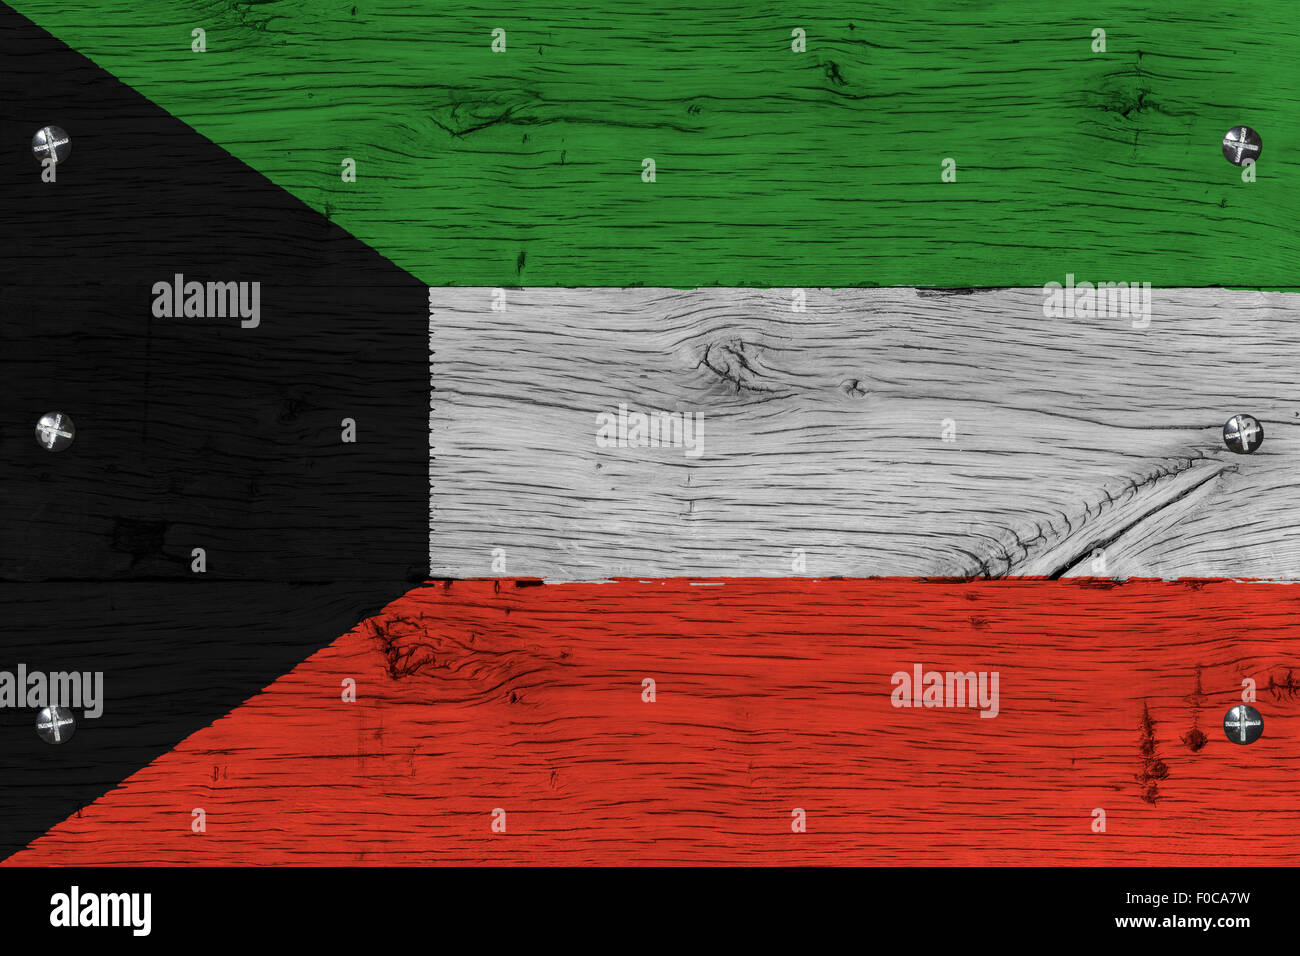 Kuwait national flag. Painting is colorful on wood of old train carriage. Fastened by screws or bolts. Stock Photo